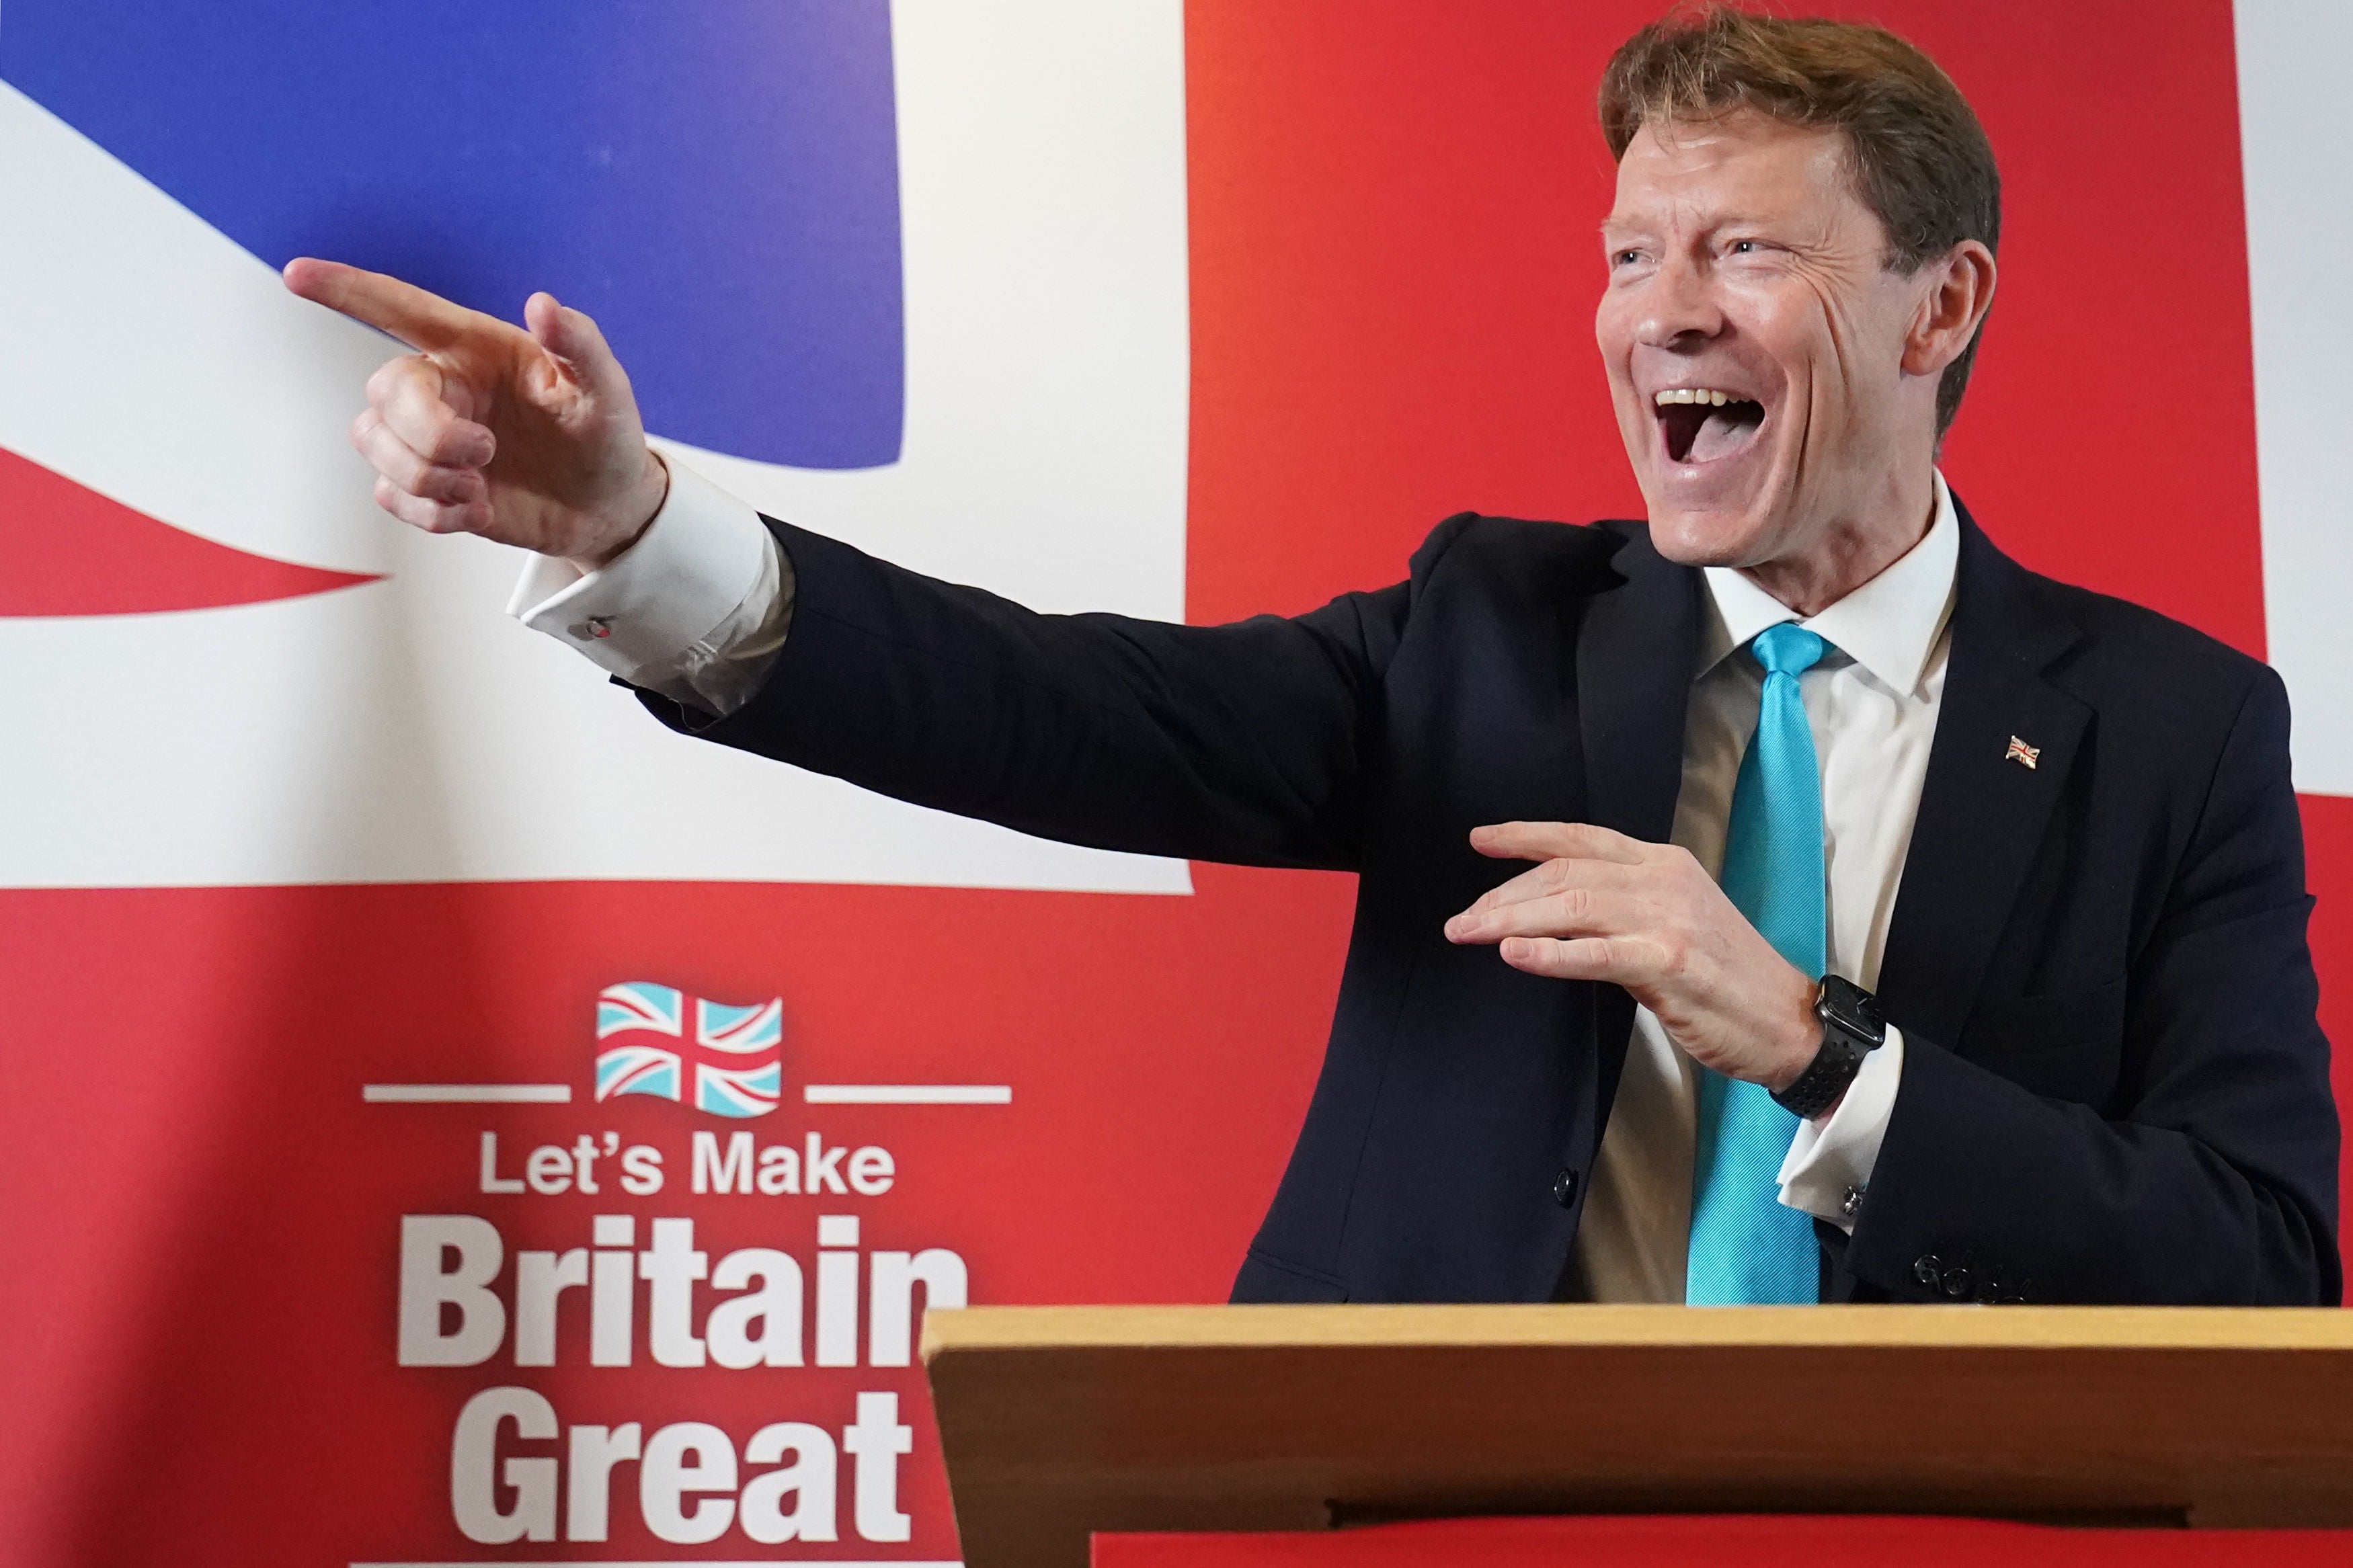 Richard Tice setting out Reform UK’s stall ahead of the general election